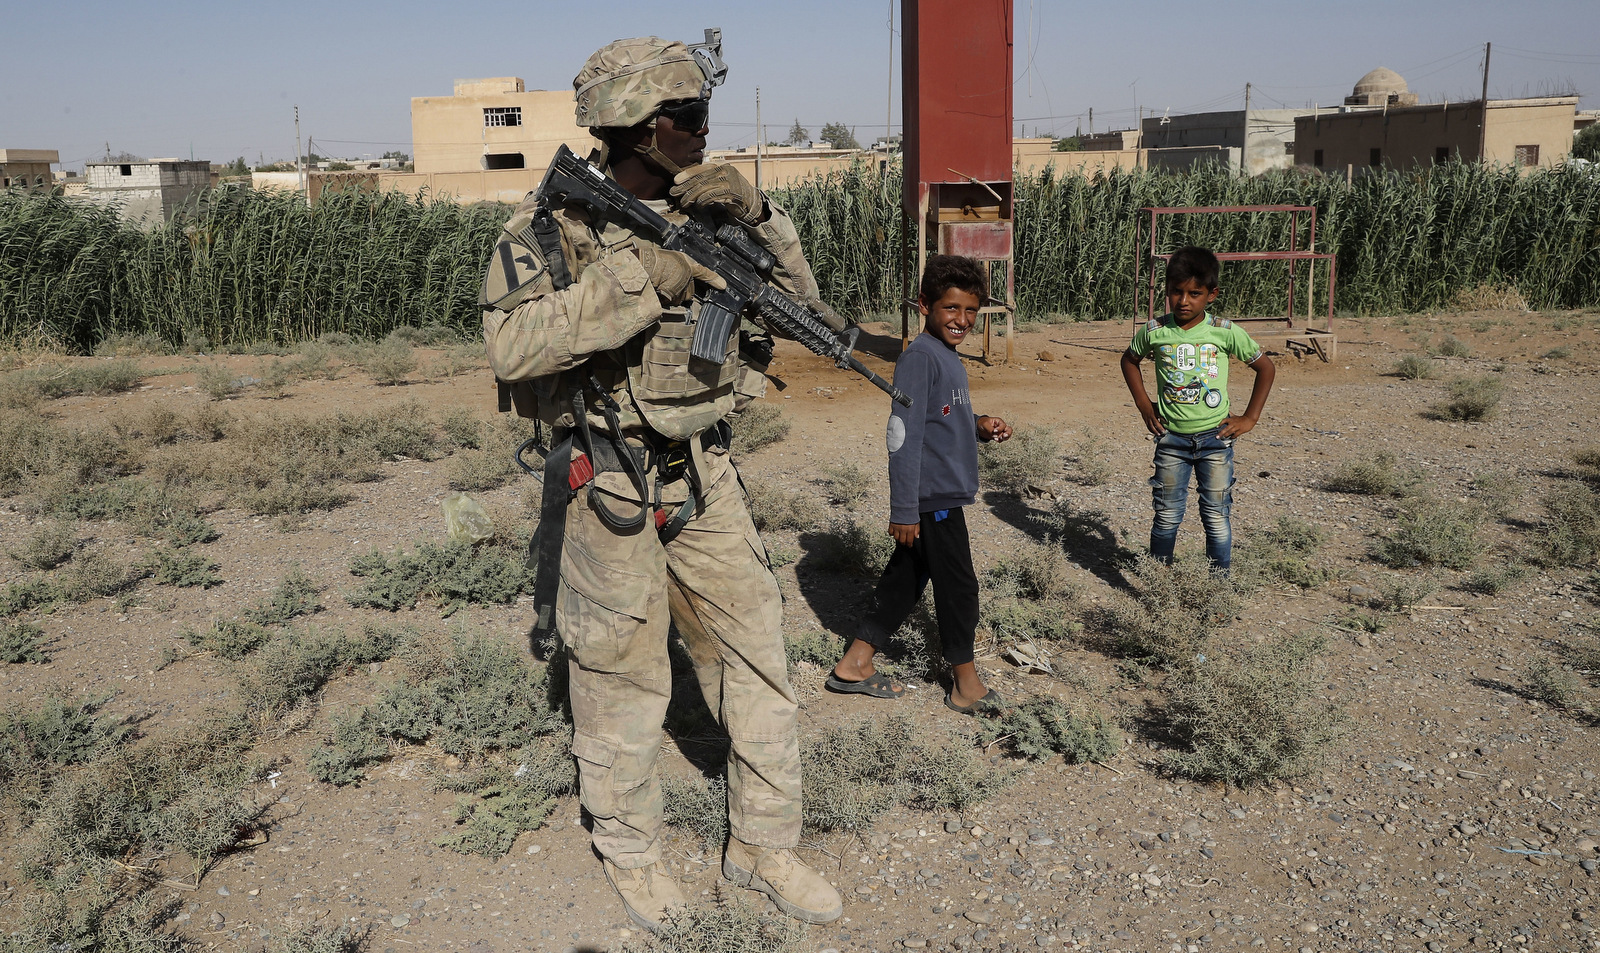 A U.S. soldier stands near Syrian children on a road that links to Raqqa, Syria, July 26, 2017. The U.S. has at least 1,000 troops in Syria. (AP/Hussein Malla)